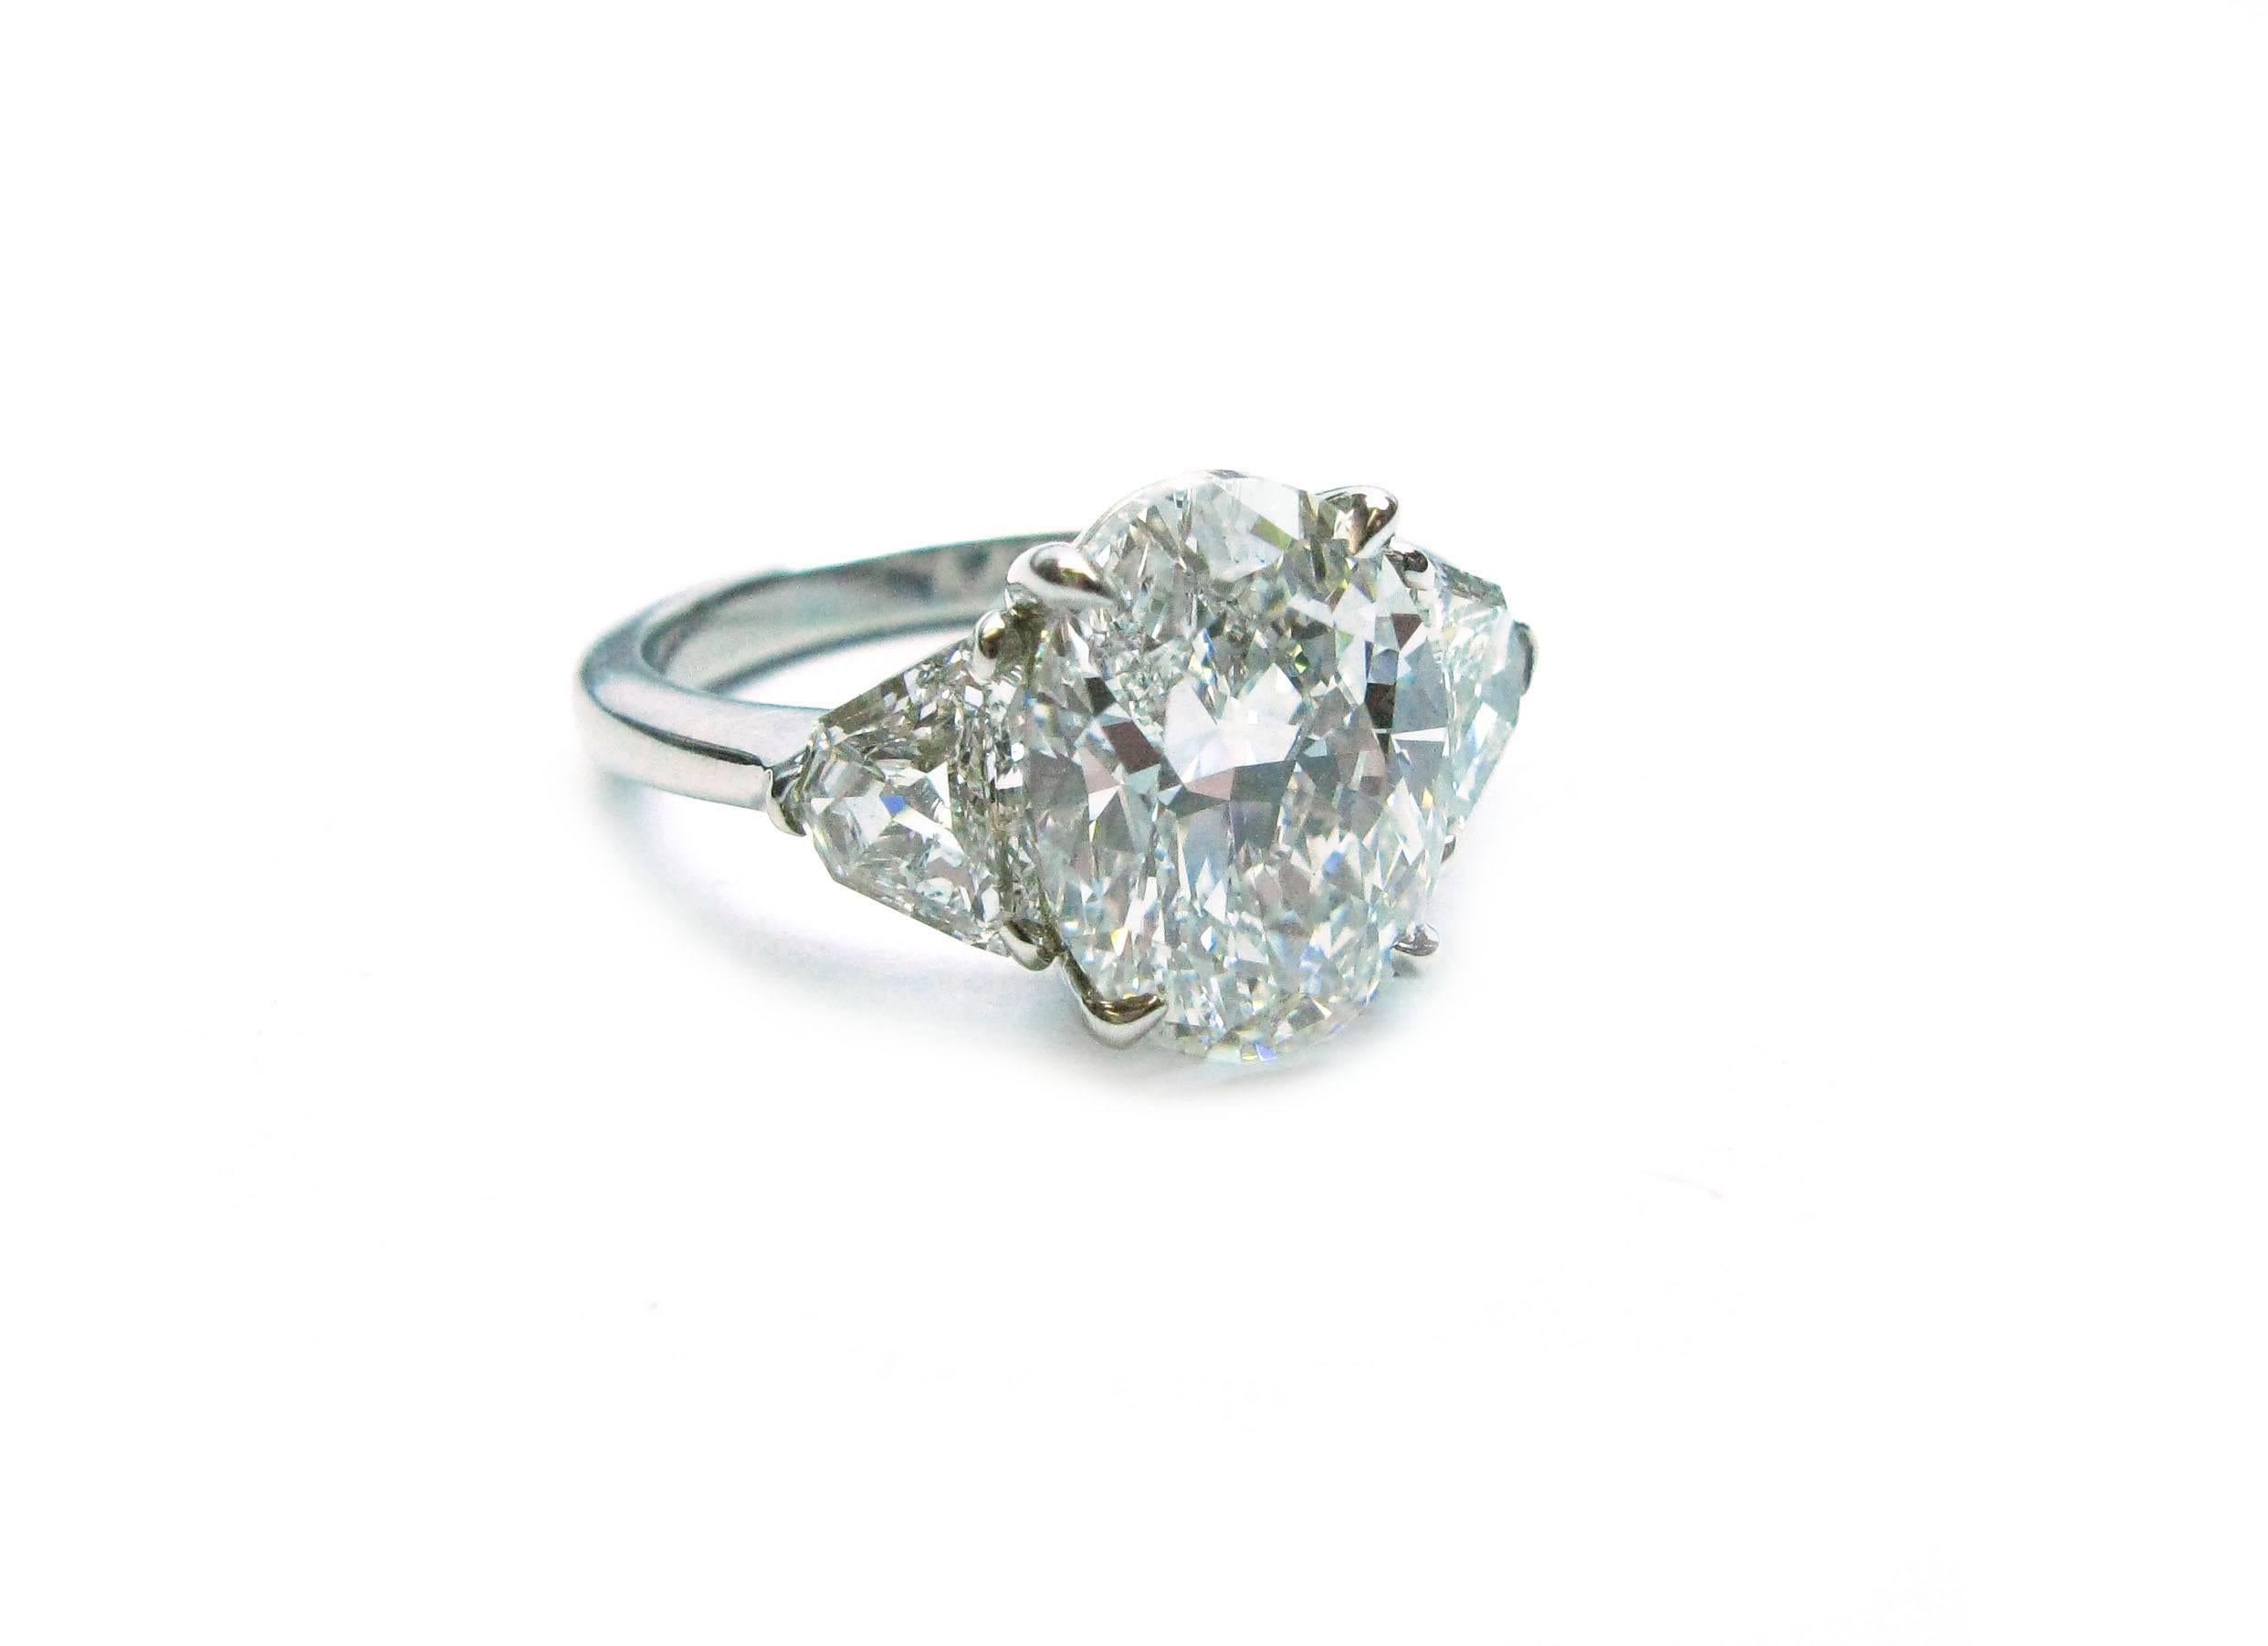 This lovely handmade platinum ring features a GIA certified 3.63ct, G color, VS1 clarity, Oval cut diamond center stone with 0.84ctw shield cut diamond sidestones. This sparkling combination is the perfect choice for an engagement ring!